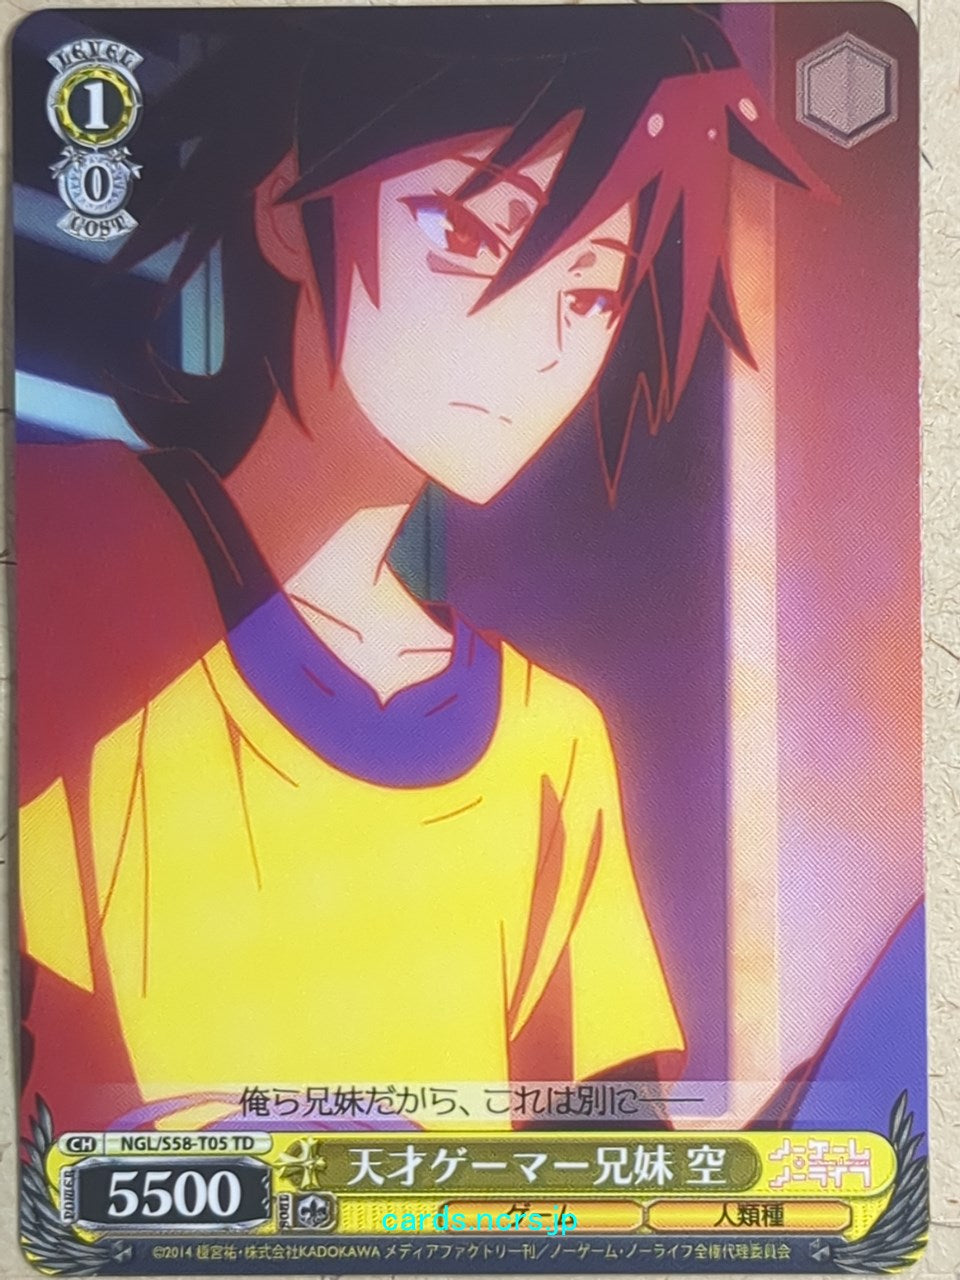 Weiss Schwarz No Game, No Life -Sora-   Trading Card NGL/S58-T05TD